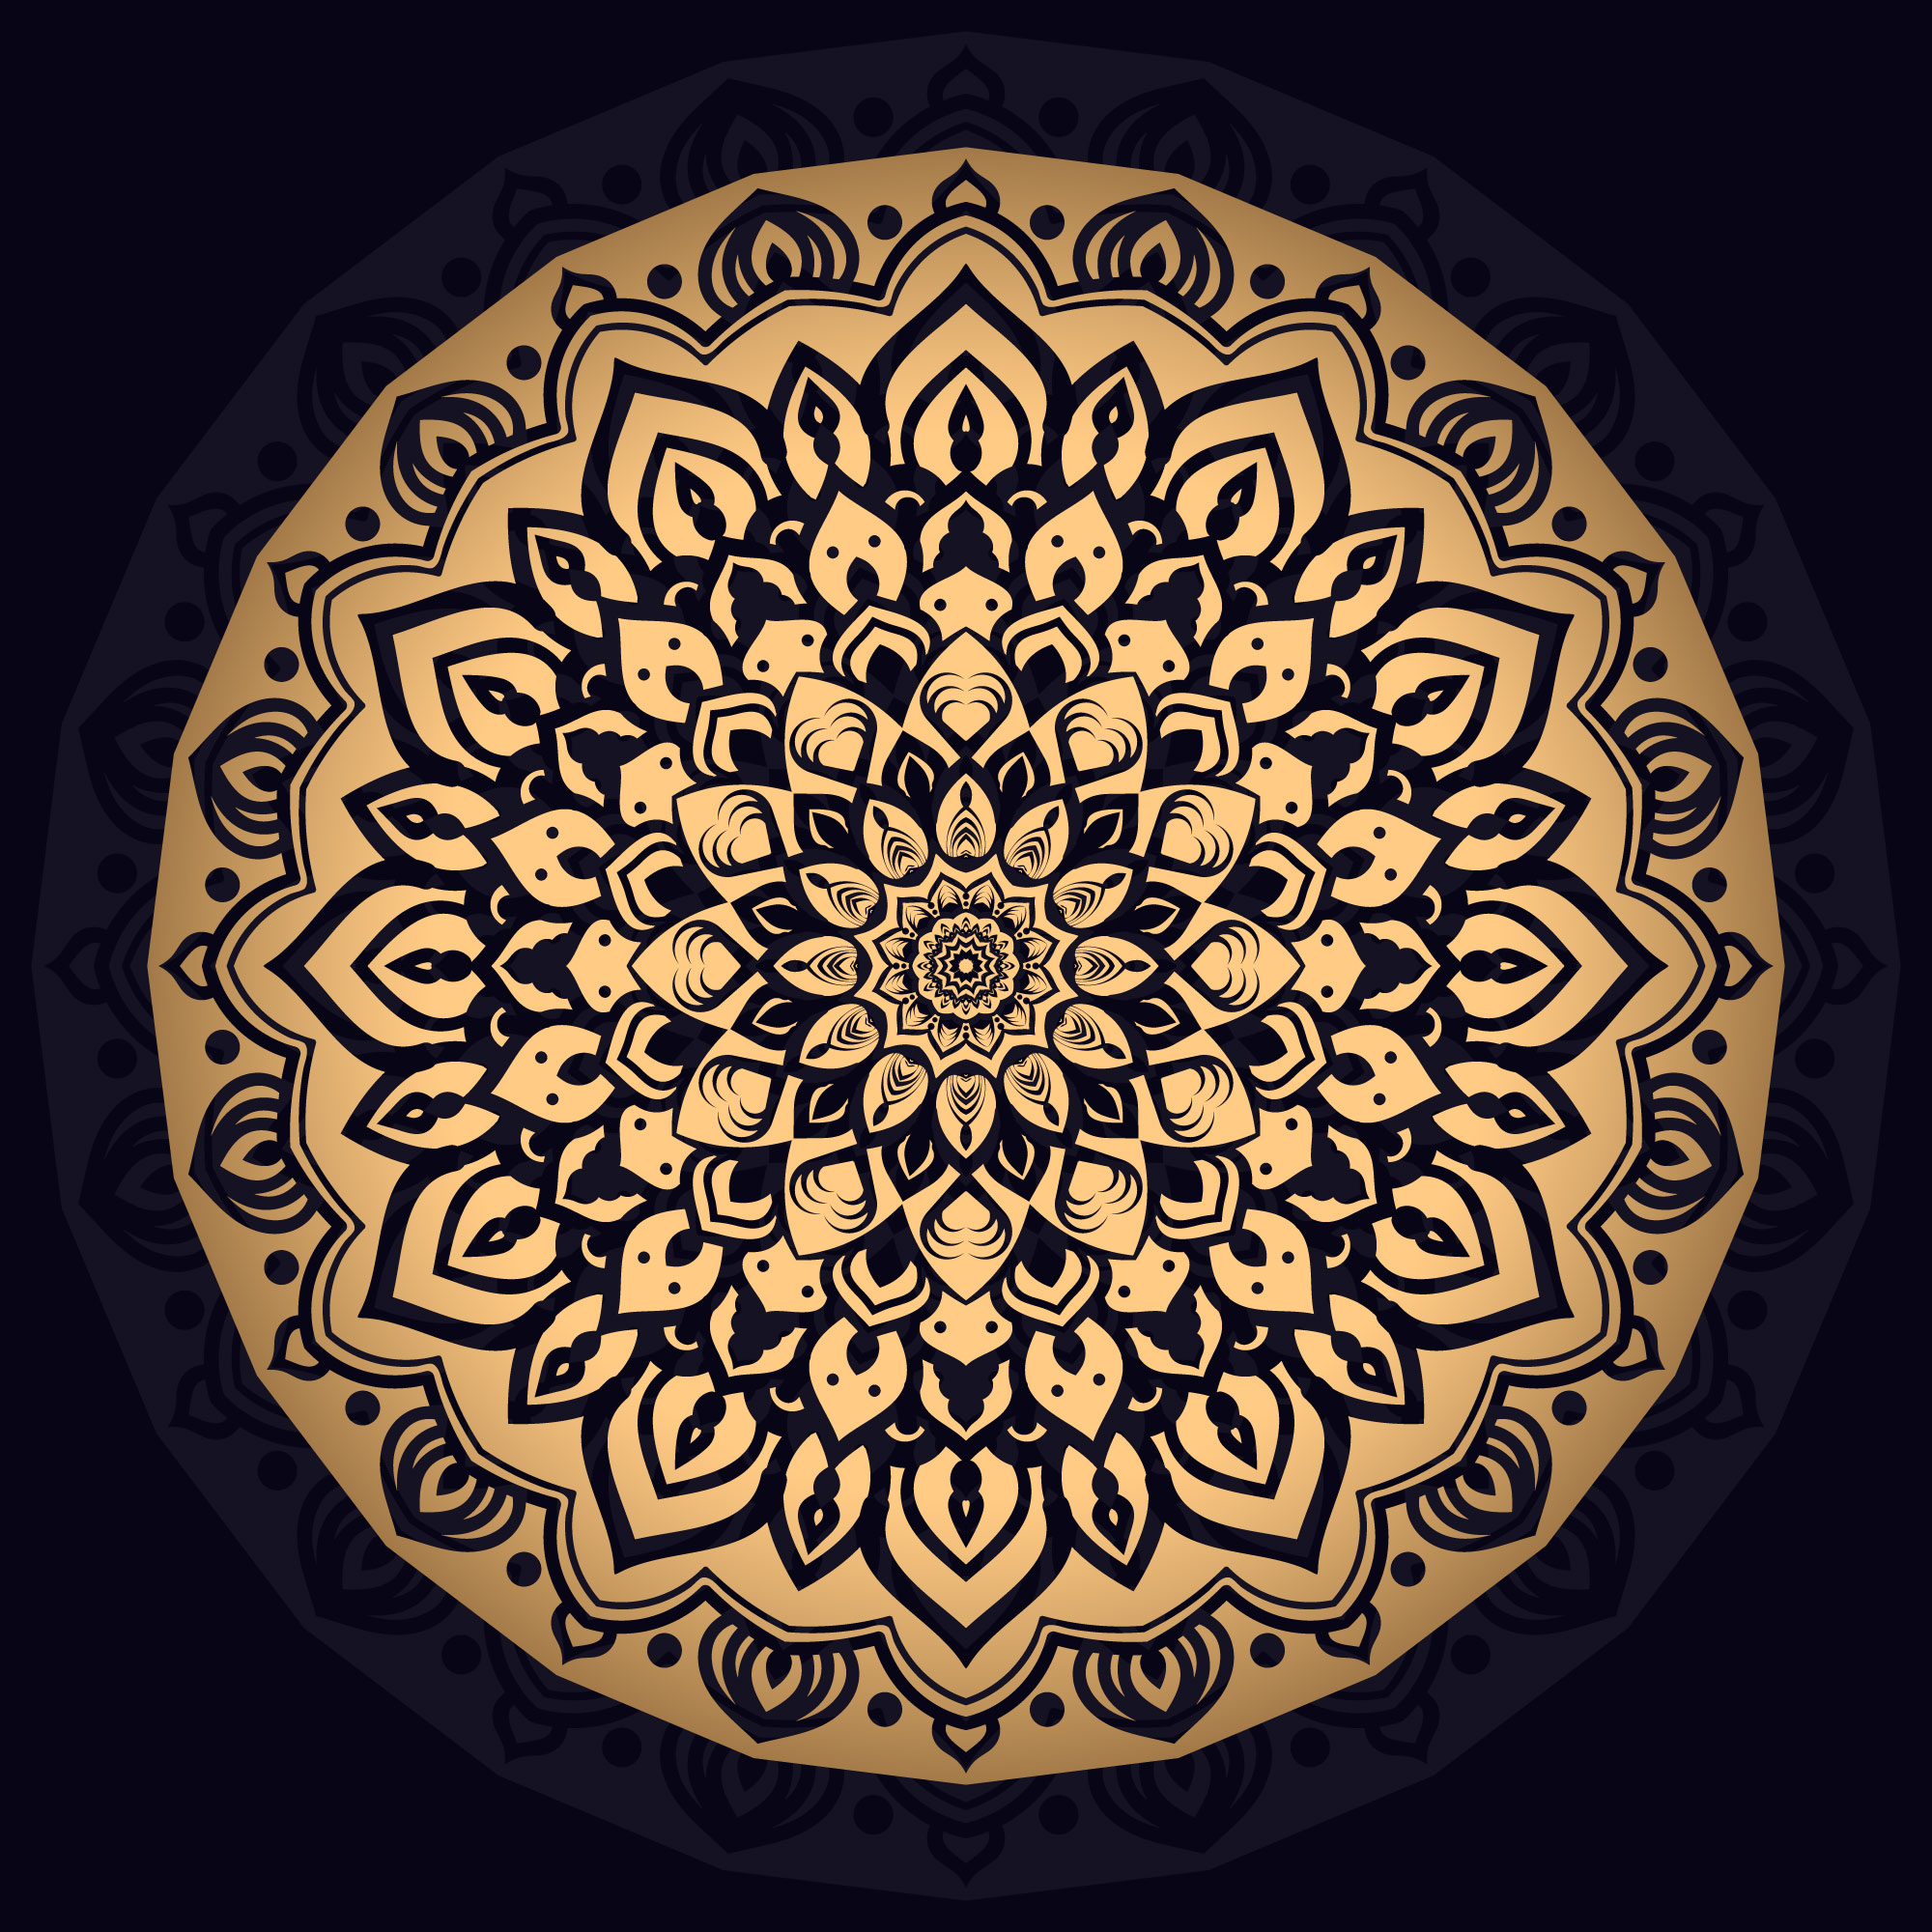 Download Gold Intricate Mandala Background - Download Free Vectors, Clipart Graphics & Vector Art